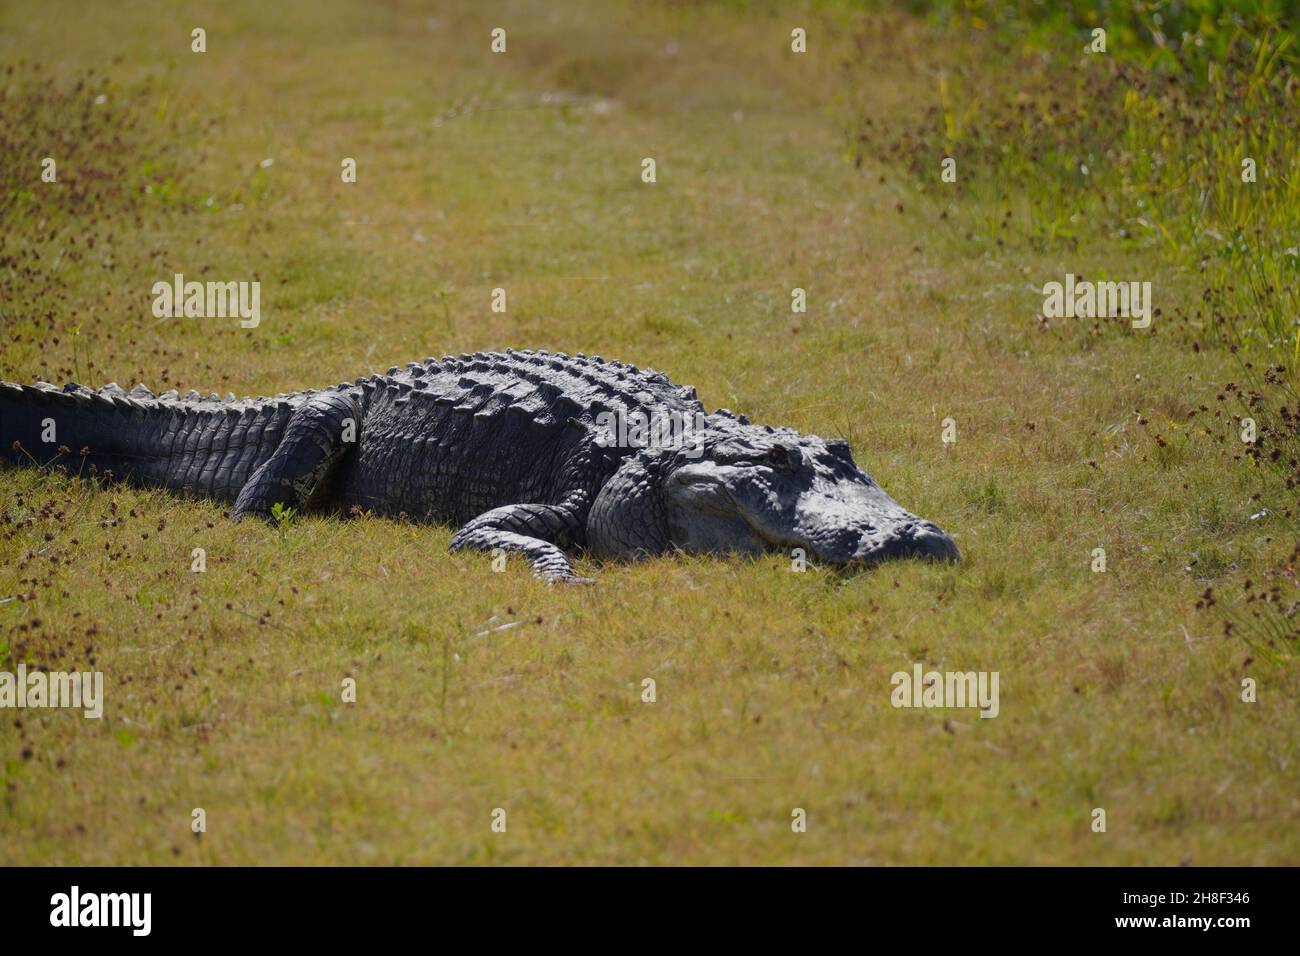 Florida alligator lying in the grass under the sun Stock Photo